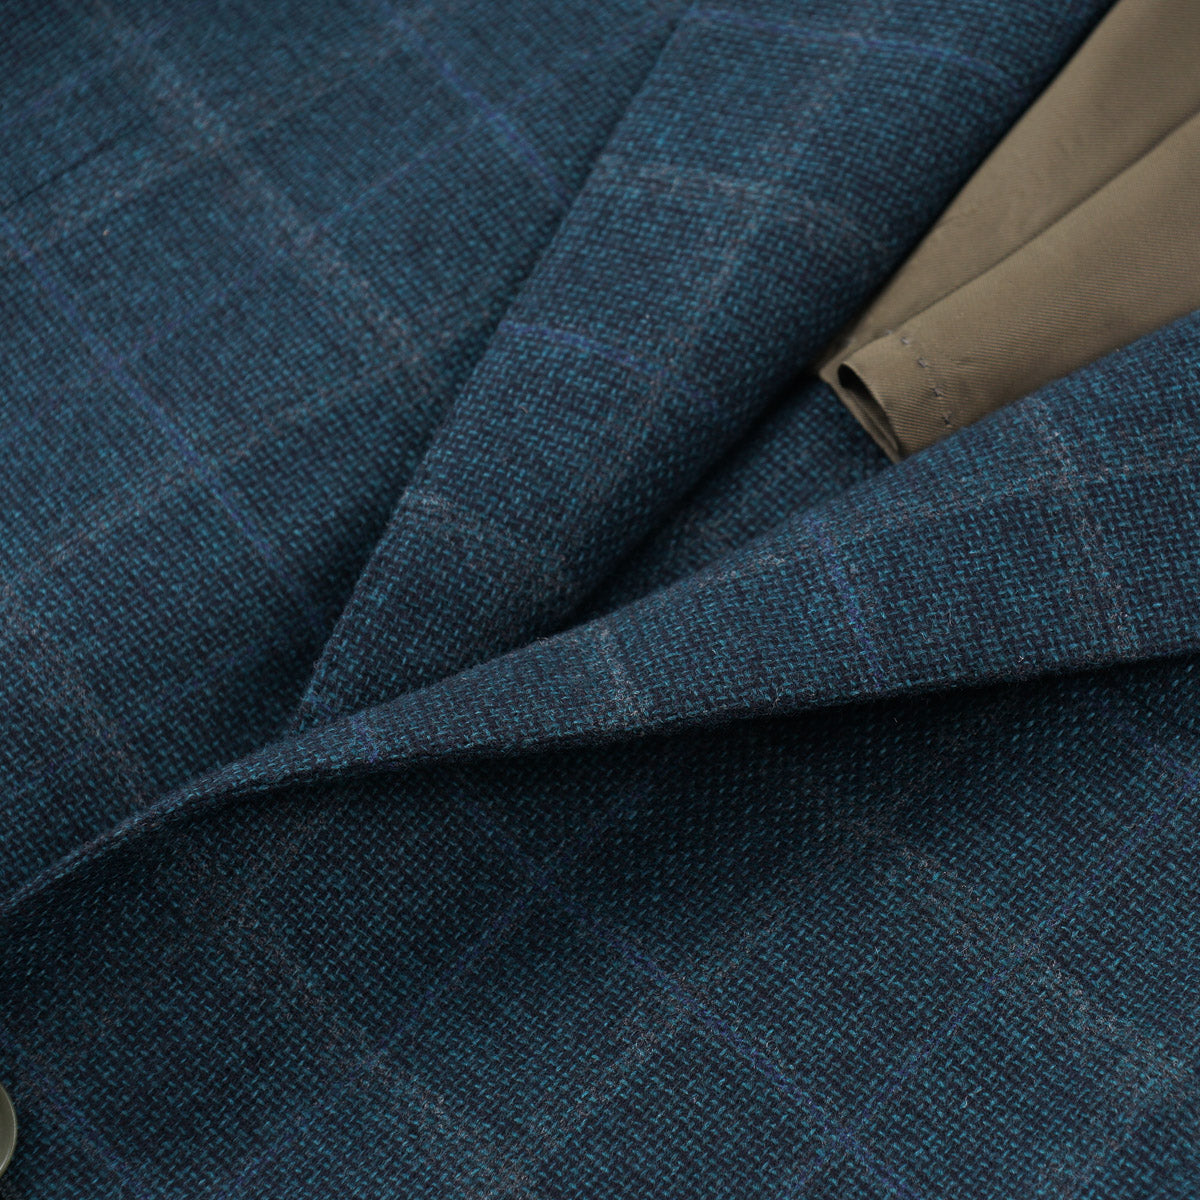 Isaia Soft Wool and Cashmere Sport Coat - Top Shelf Apparel